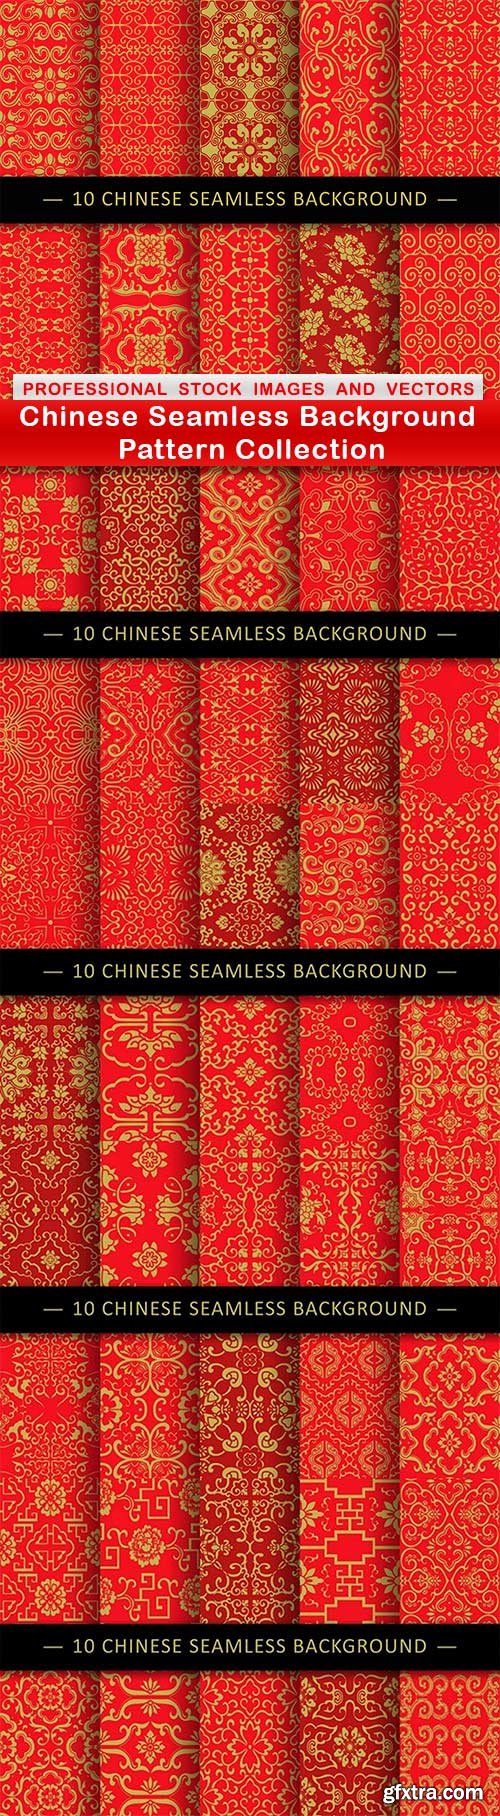 Chinese Seamless Background Pattern Collection - 5 EPS